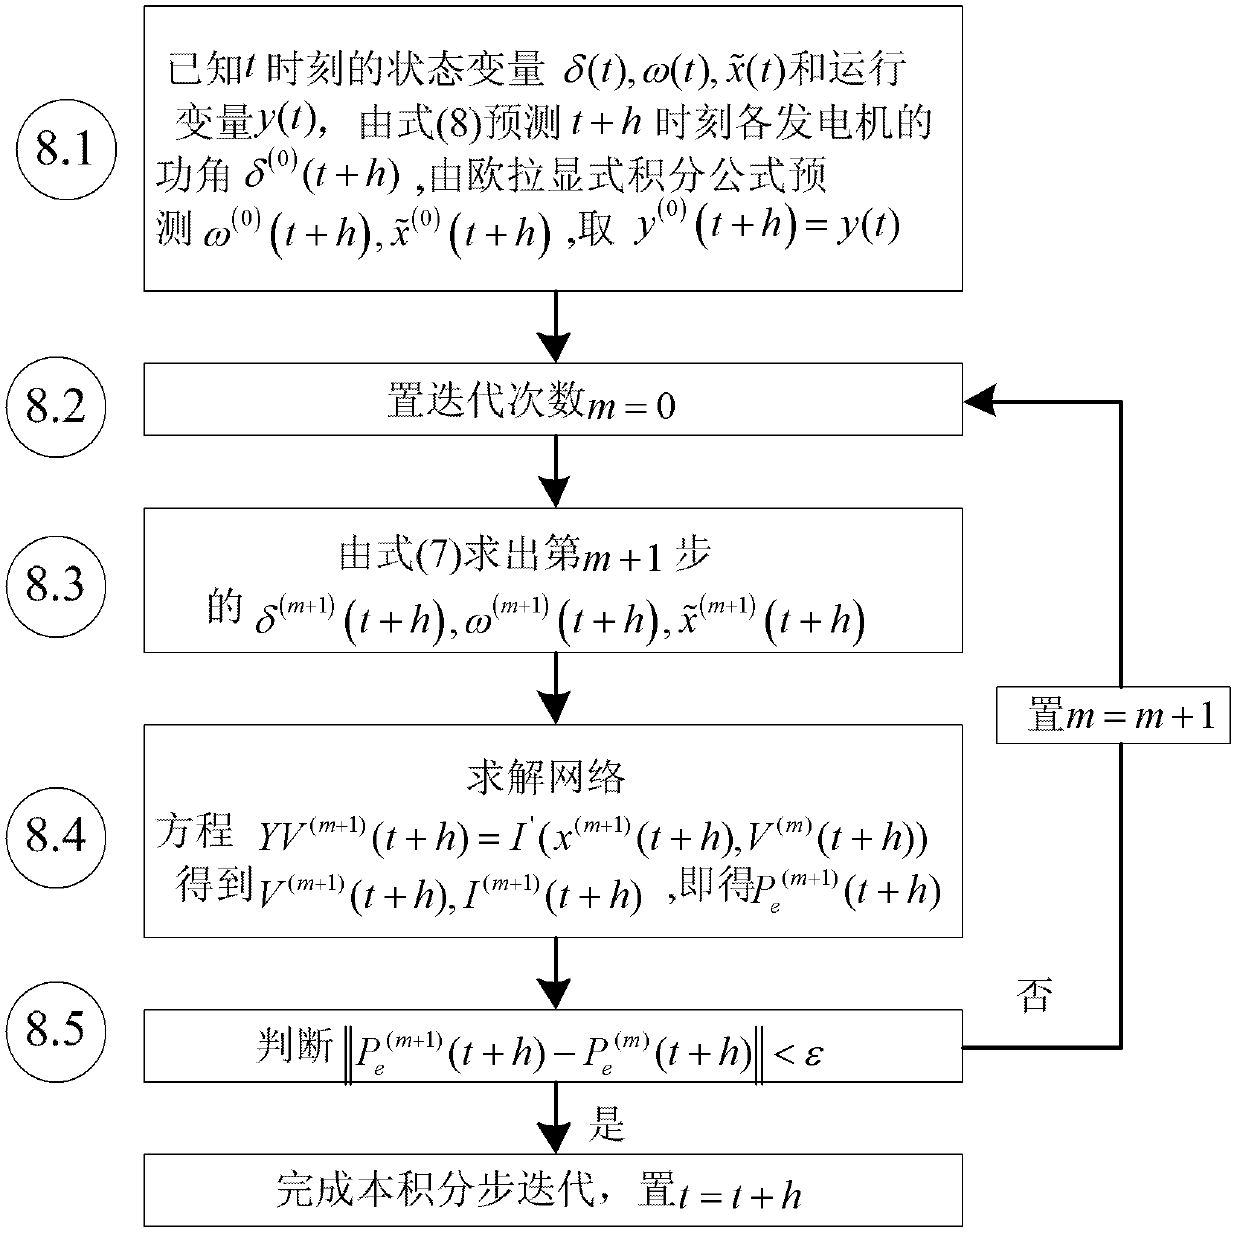 Power system transient stability simulating method based on implicit numerical integration